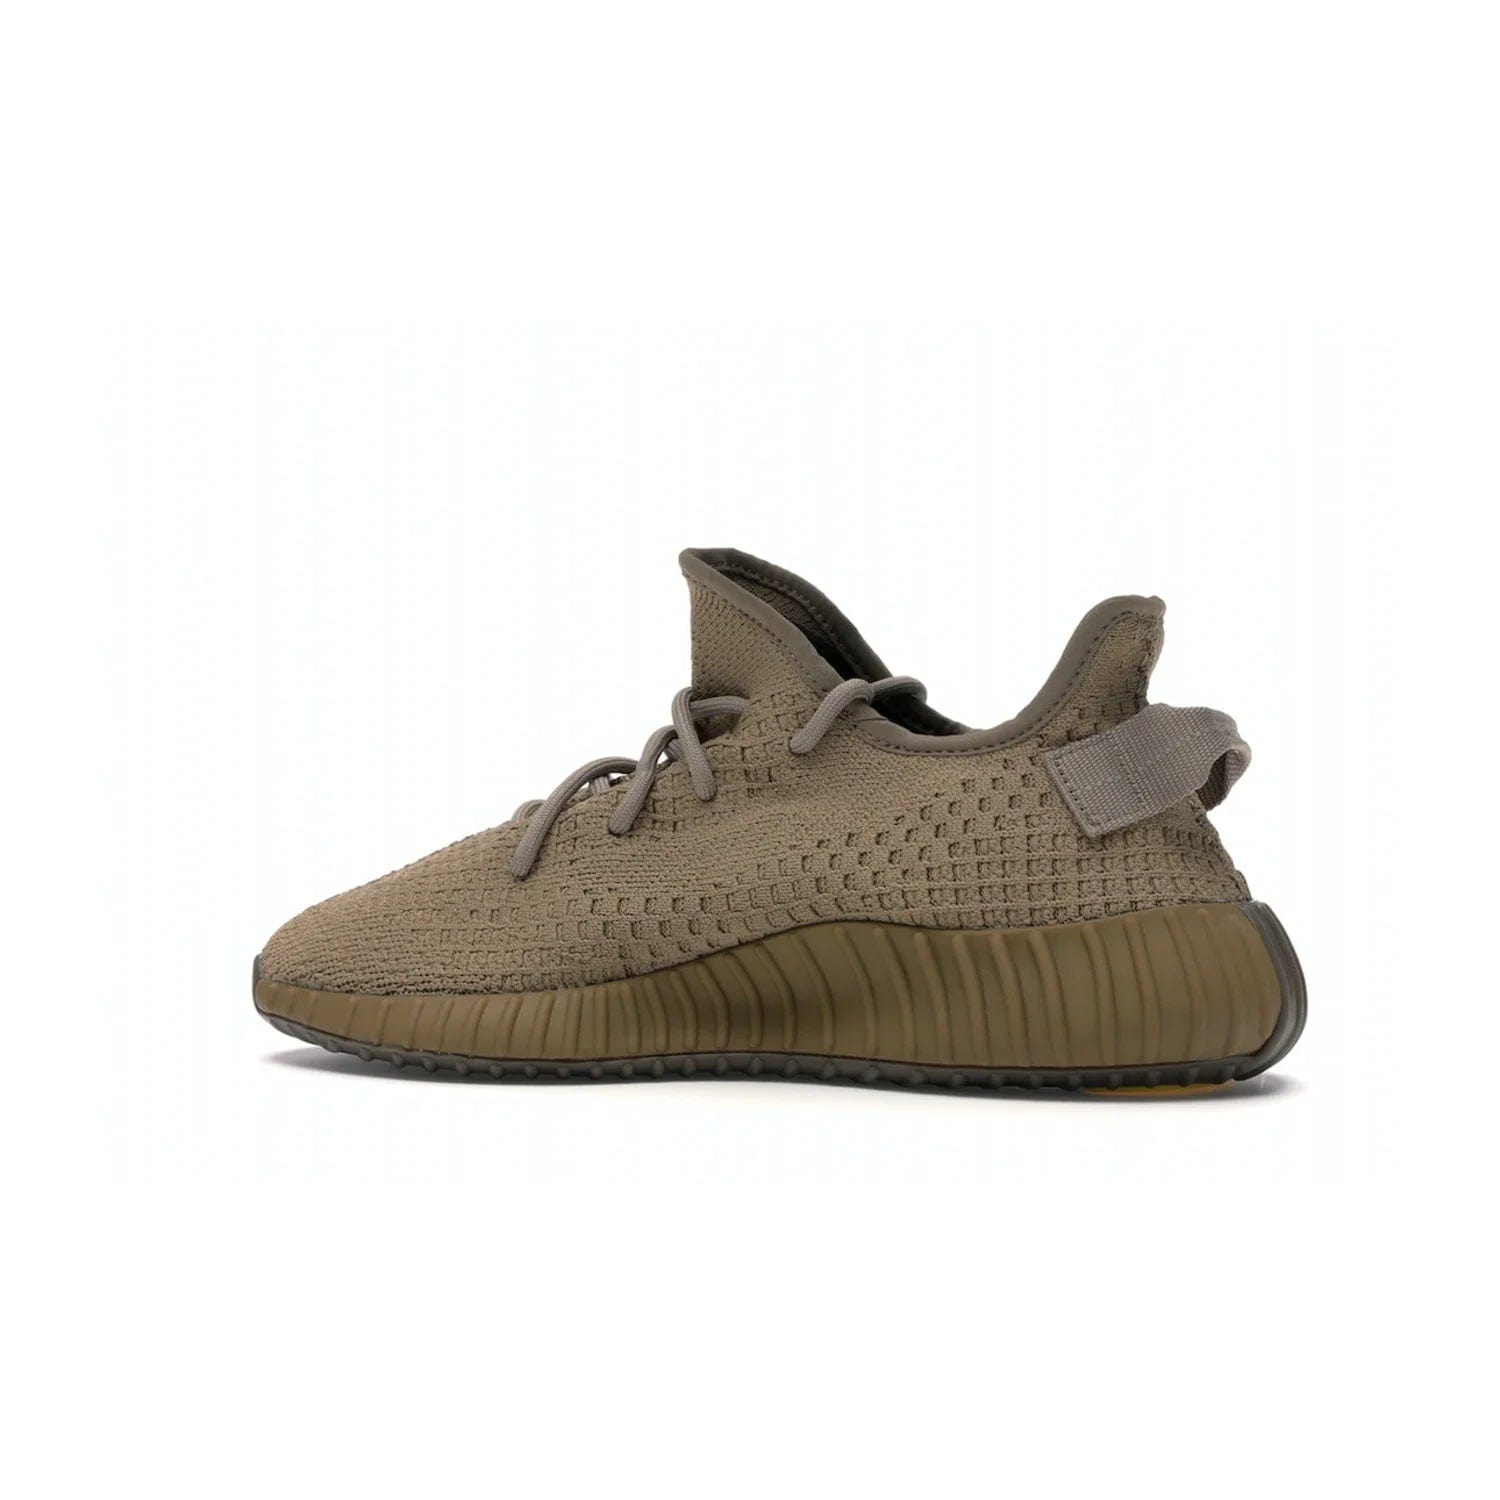 adidas Yeezy Boost 350 V2 Earth - Image 21 - Only at www.BallersClubKickz.com - Abstract style with the adidas Yeezy Boost 350 V2 Earth. Crafted with mud Primeknit upper, mud Boost and interior, and a translucent side stripe. Regional exclusive in Earth/Earth/Earth colorway, these fashionable sneakers released in February 2020. Showcase your style with the Yeezy 350 V2 Earth.